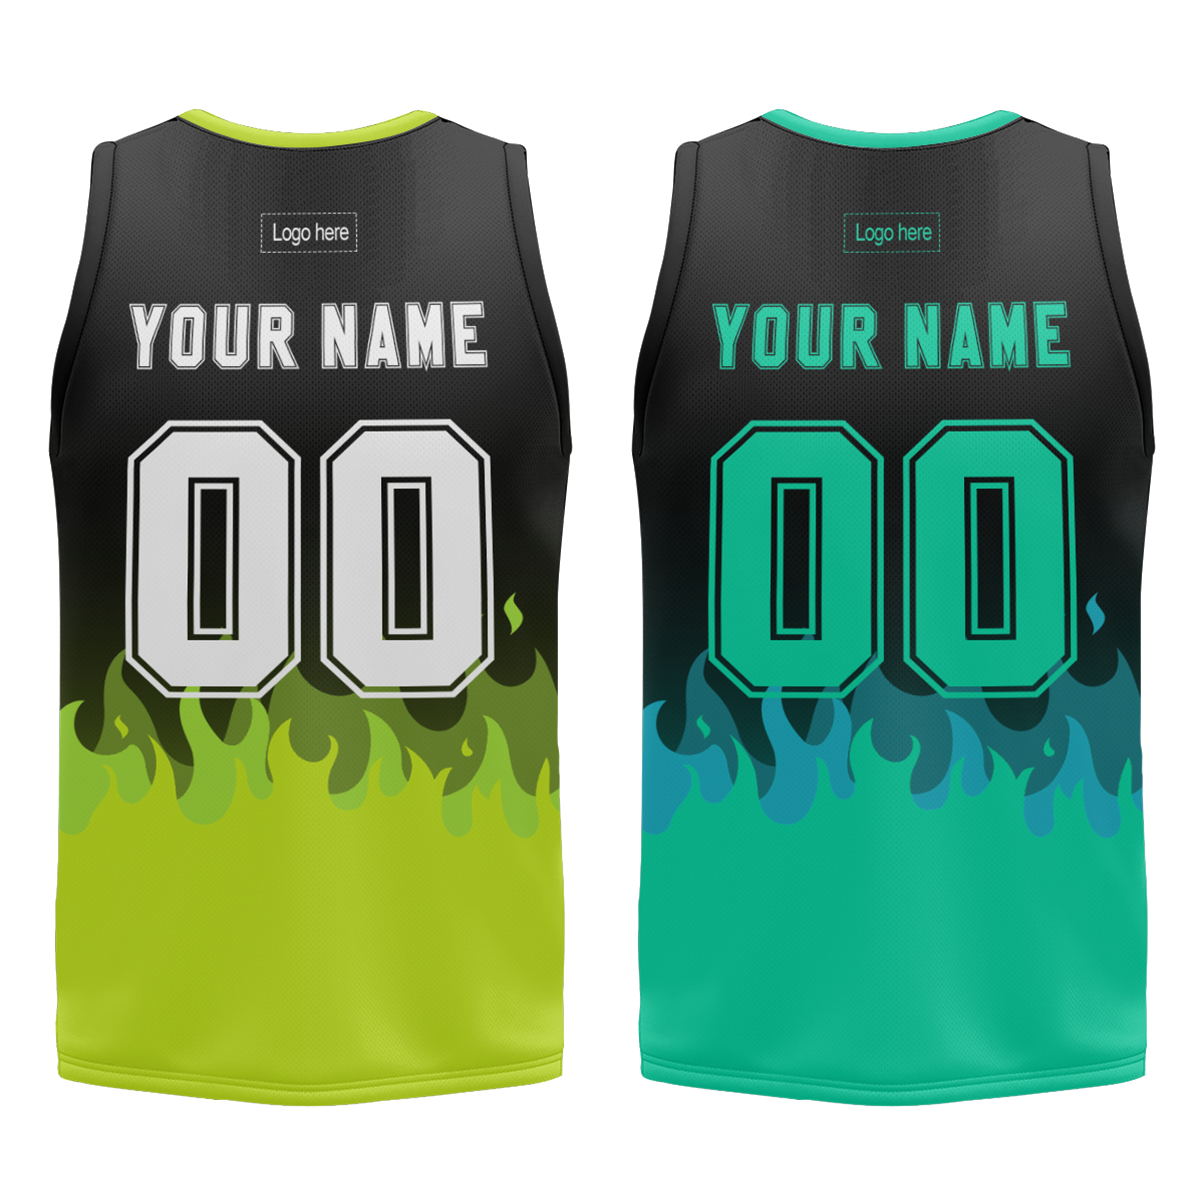 wholesale-custom-basketball-jerseys-sublimation-printed-reversible-mesh-performance-athletic-team-uniforms-for-sports-at-cj-pod-6